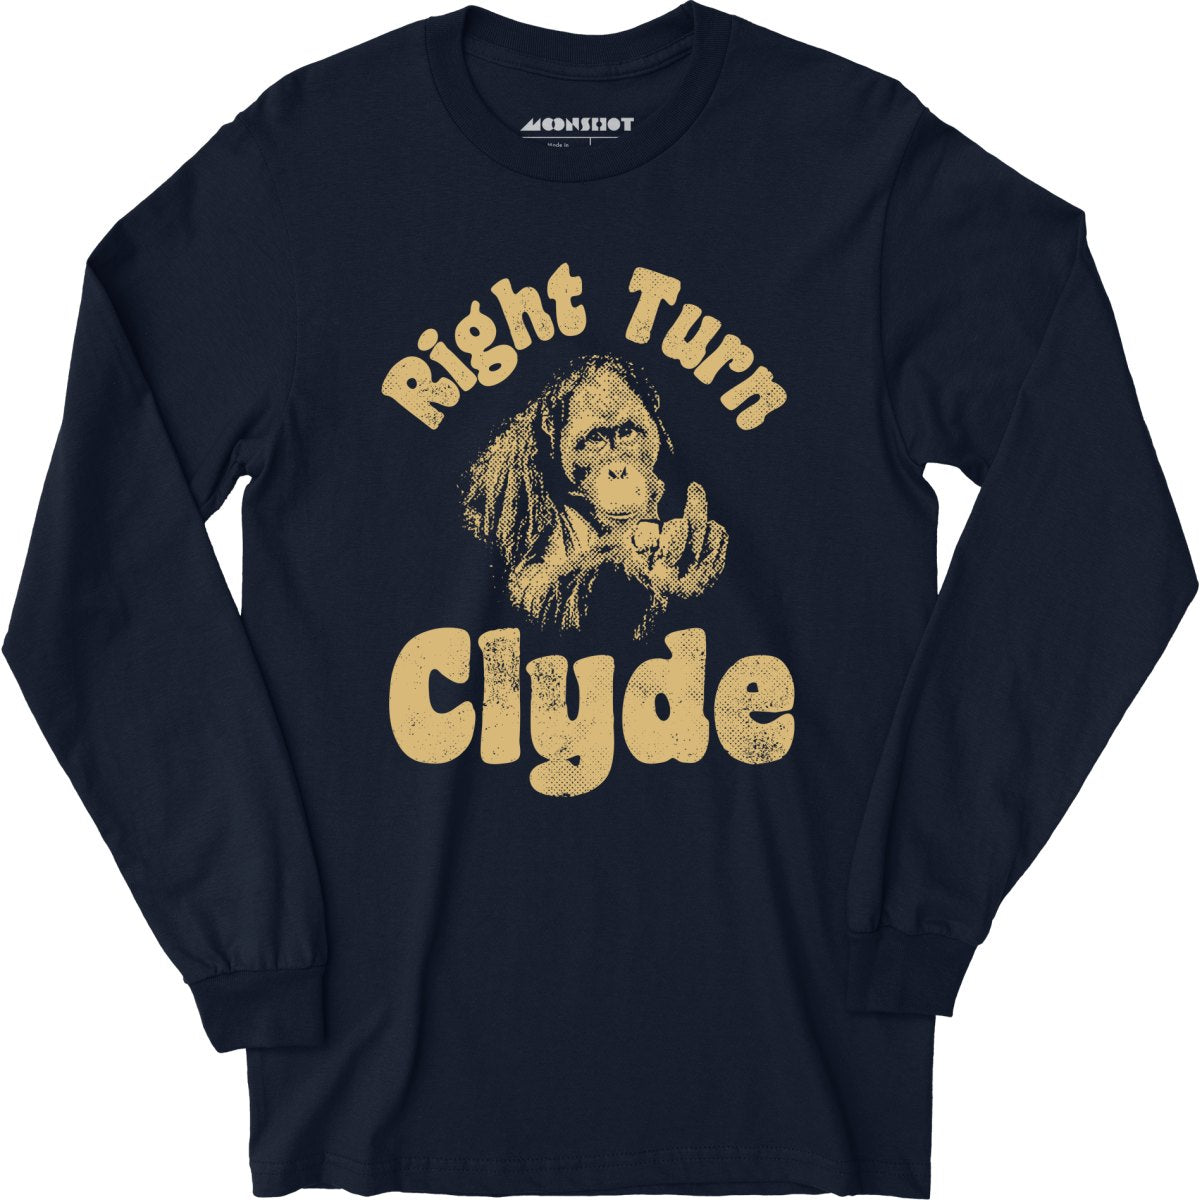 Right Turn Clyde - Long Sleeve T-Shirt